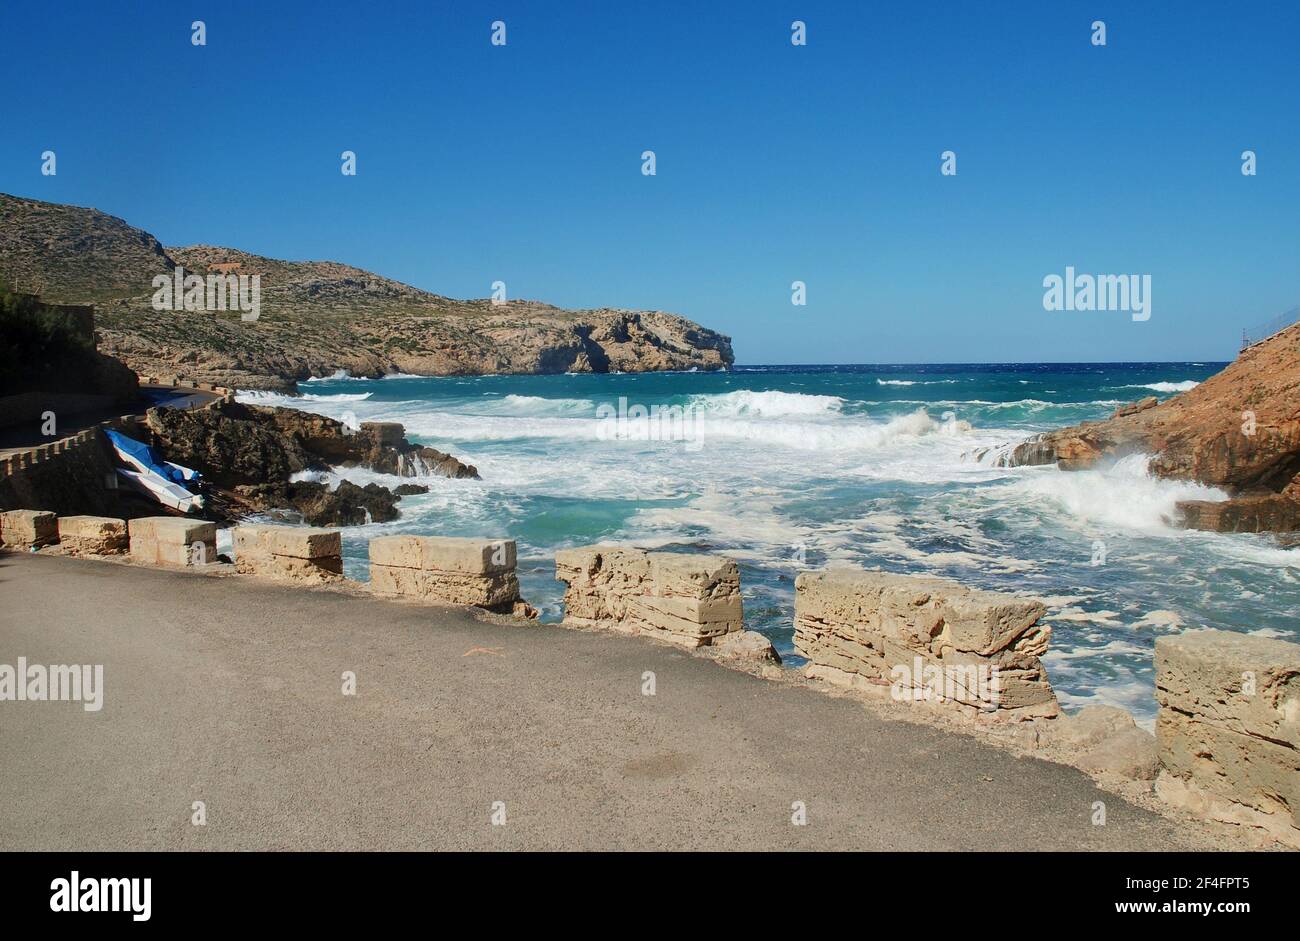 Rough seas at Cala Carbo in Cala San Vicente on the Spanish island of Majorca. Stock Photo